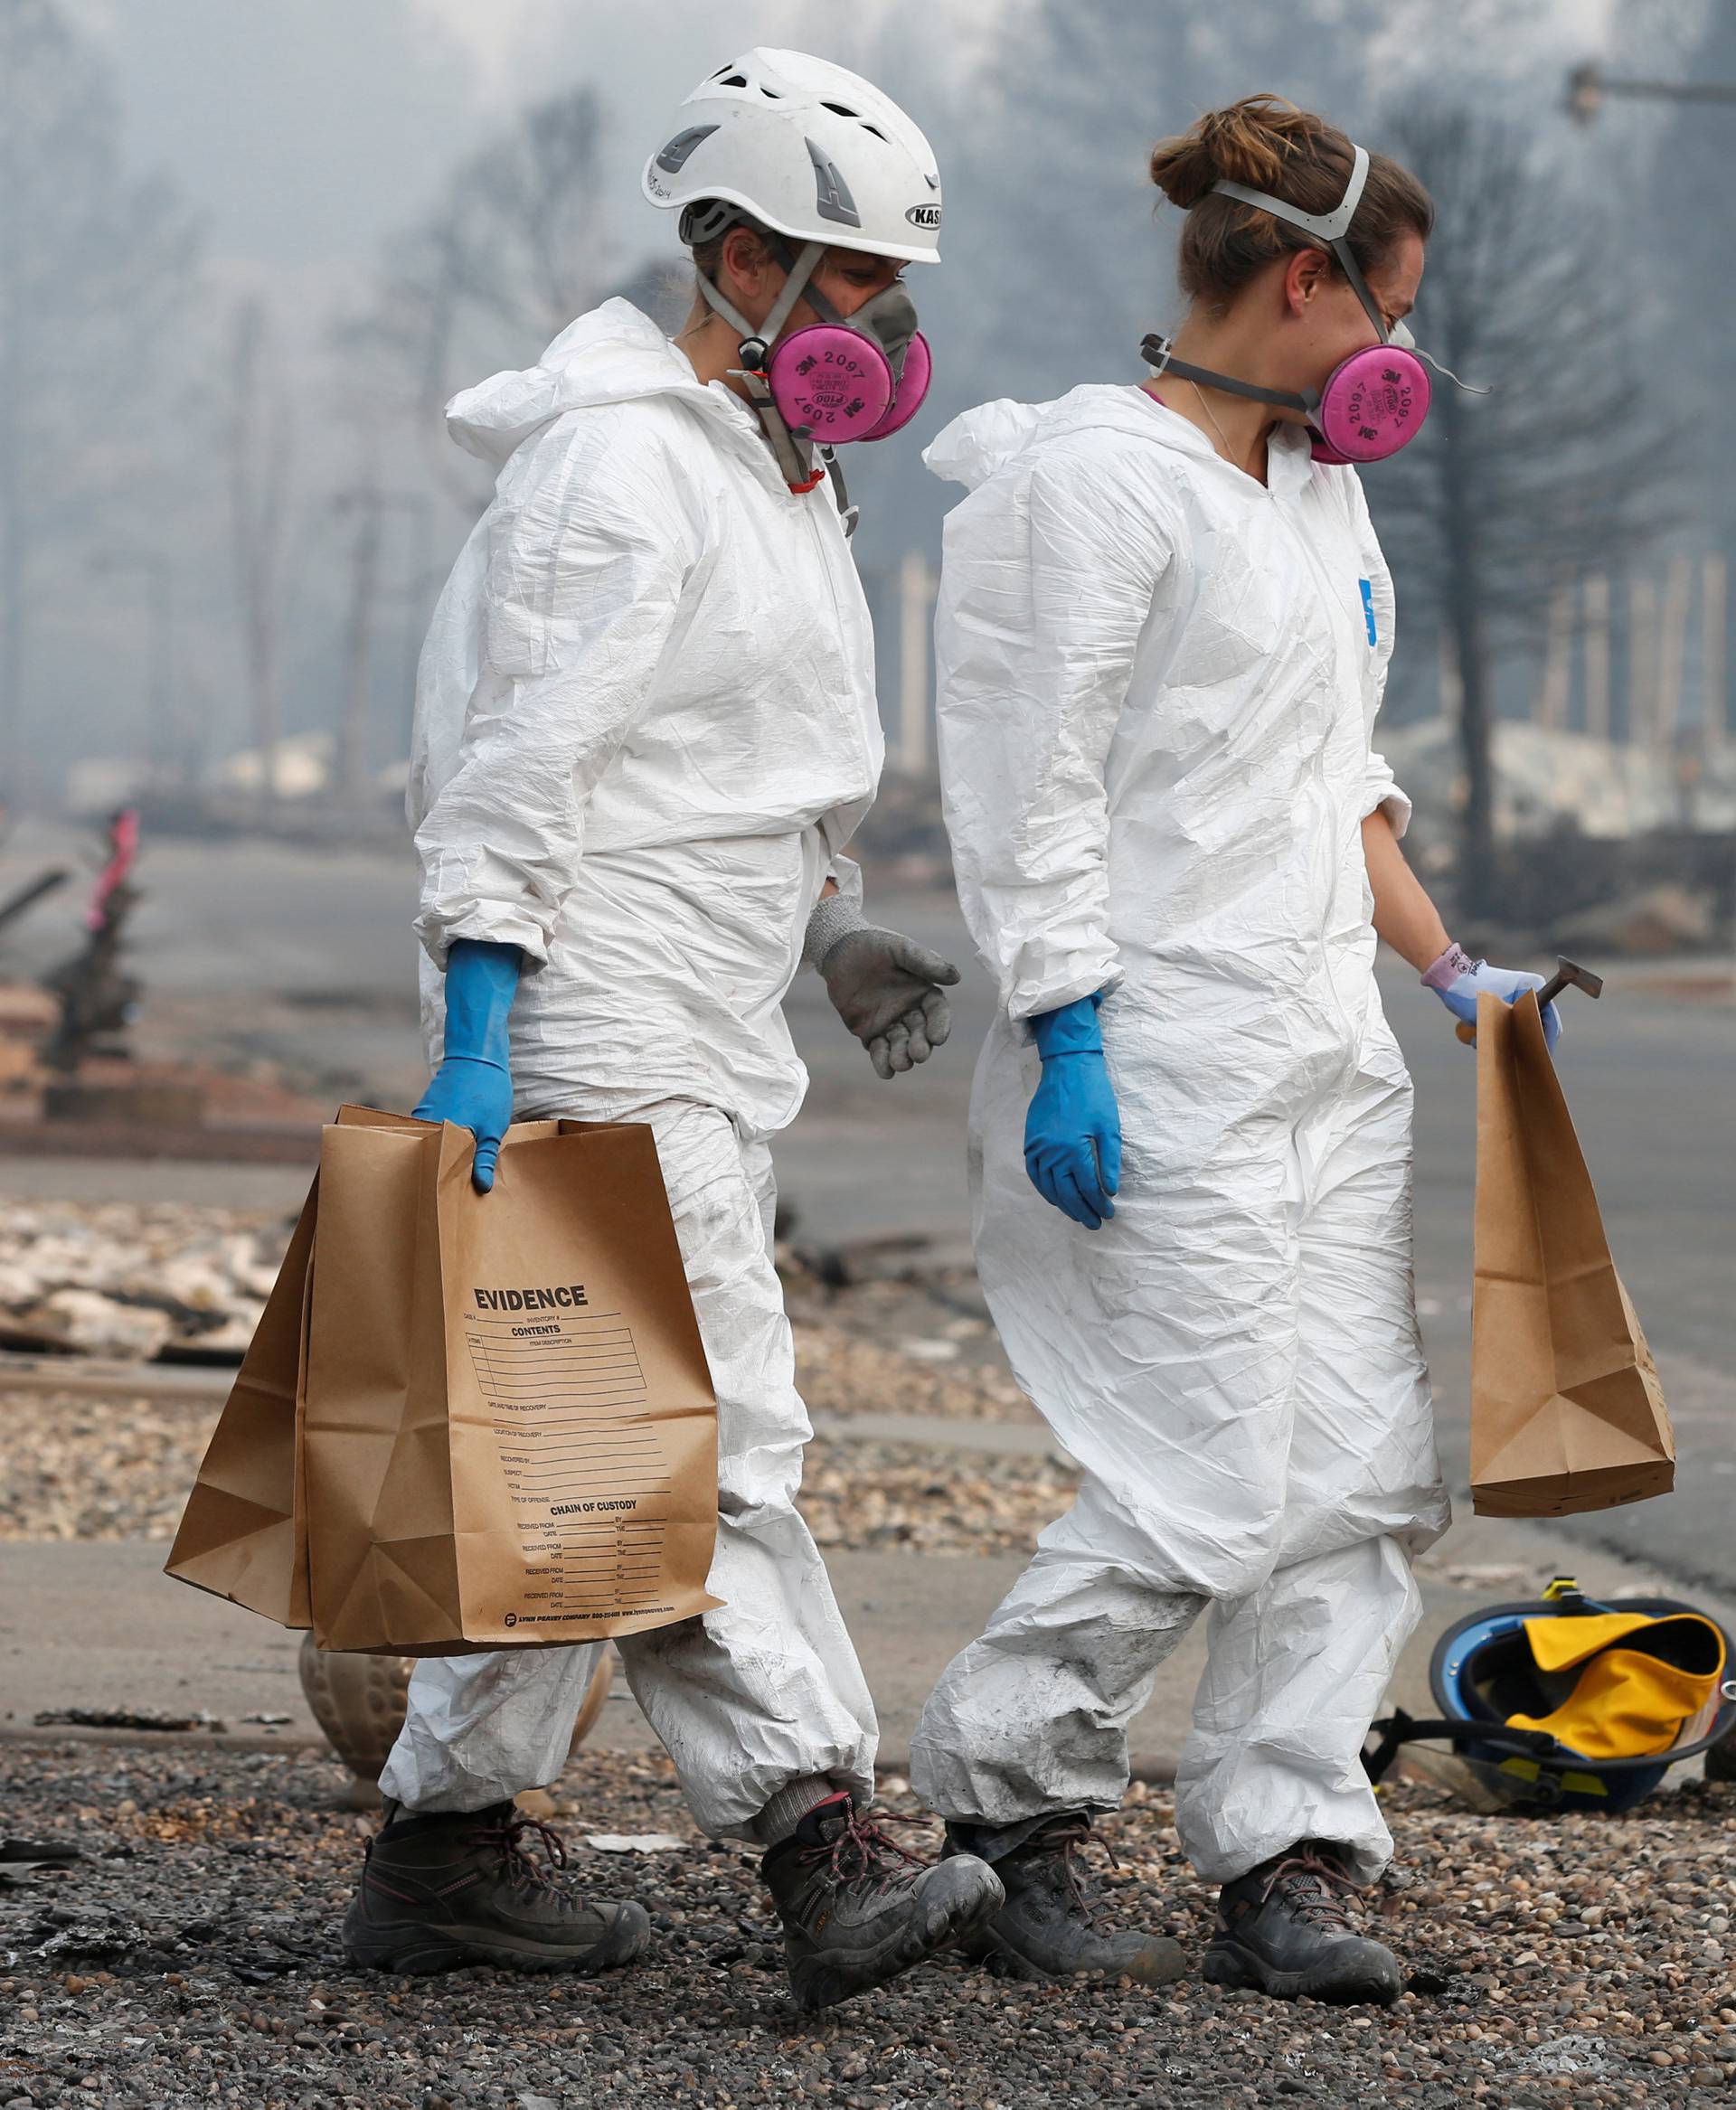 Forensic anthropologists Kyra Stull (C) and Tatiana Vlemincq (R) recover human remains from a trailer home destroyed by the Camp Fire in Paradise